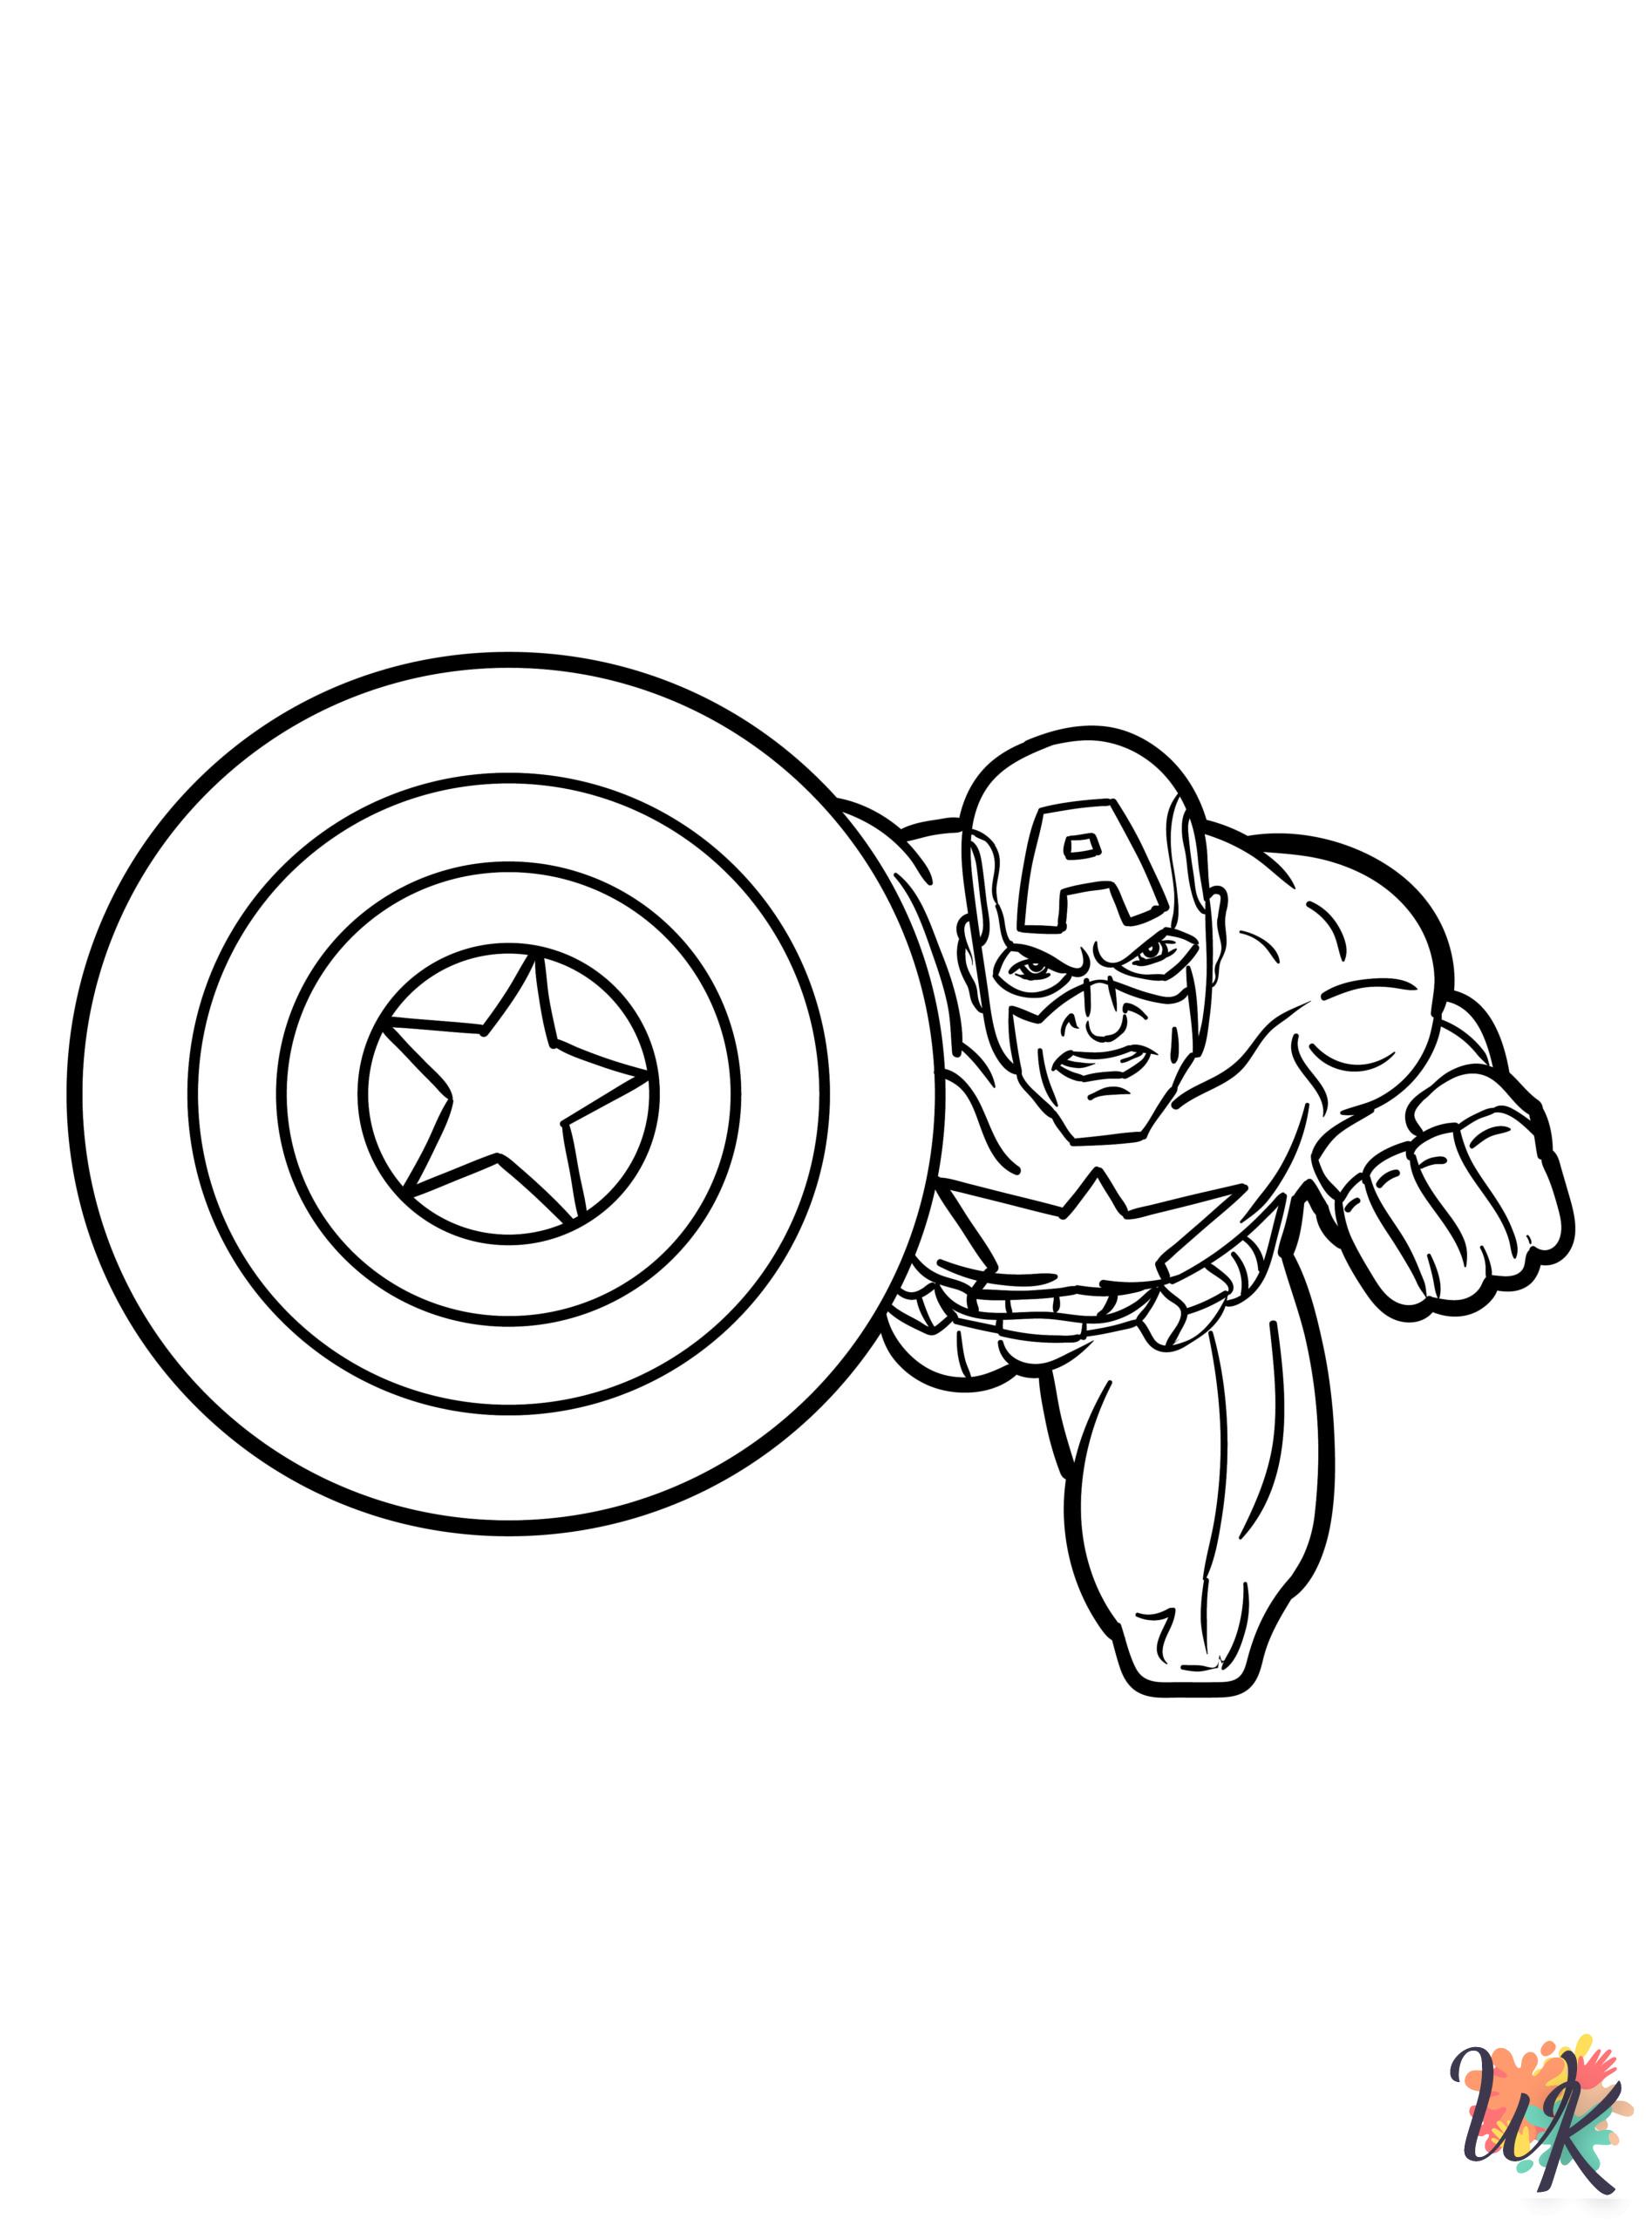 Captain America coloring pages to print